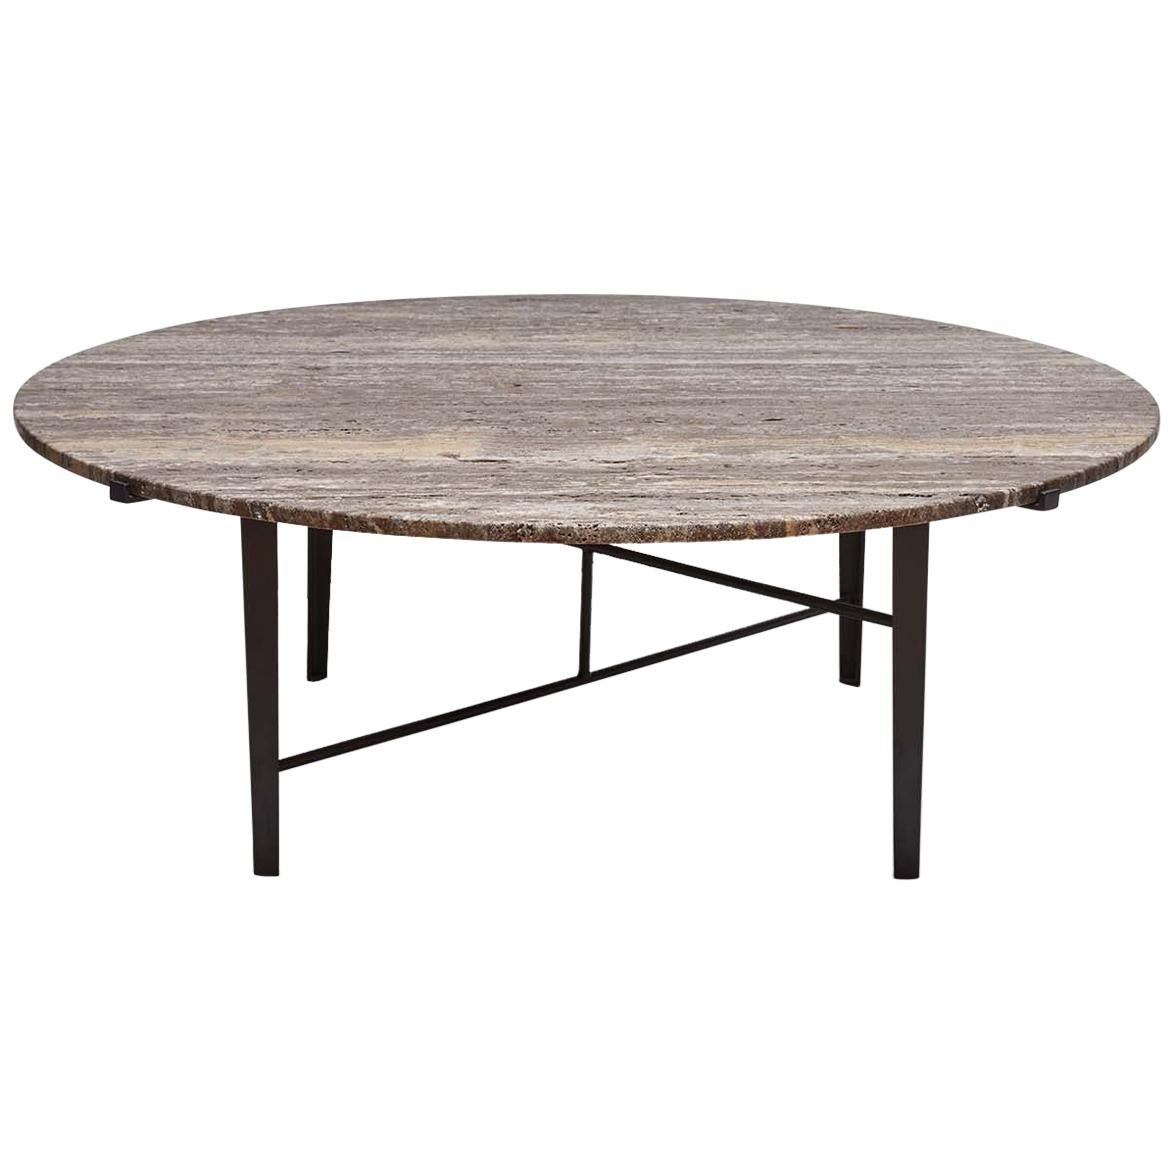 Indoor/Outdoor Montrose Coffee Table, Round by Lawson-Fenning